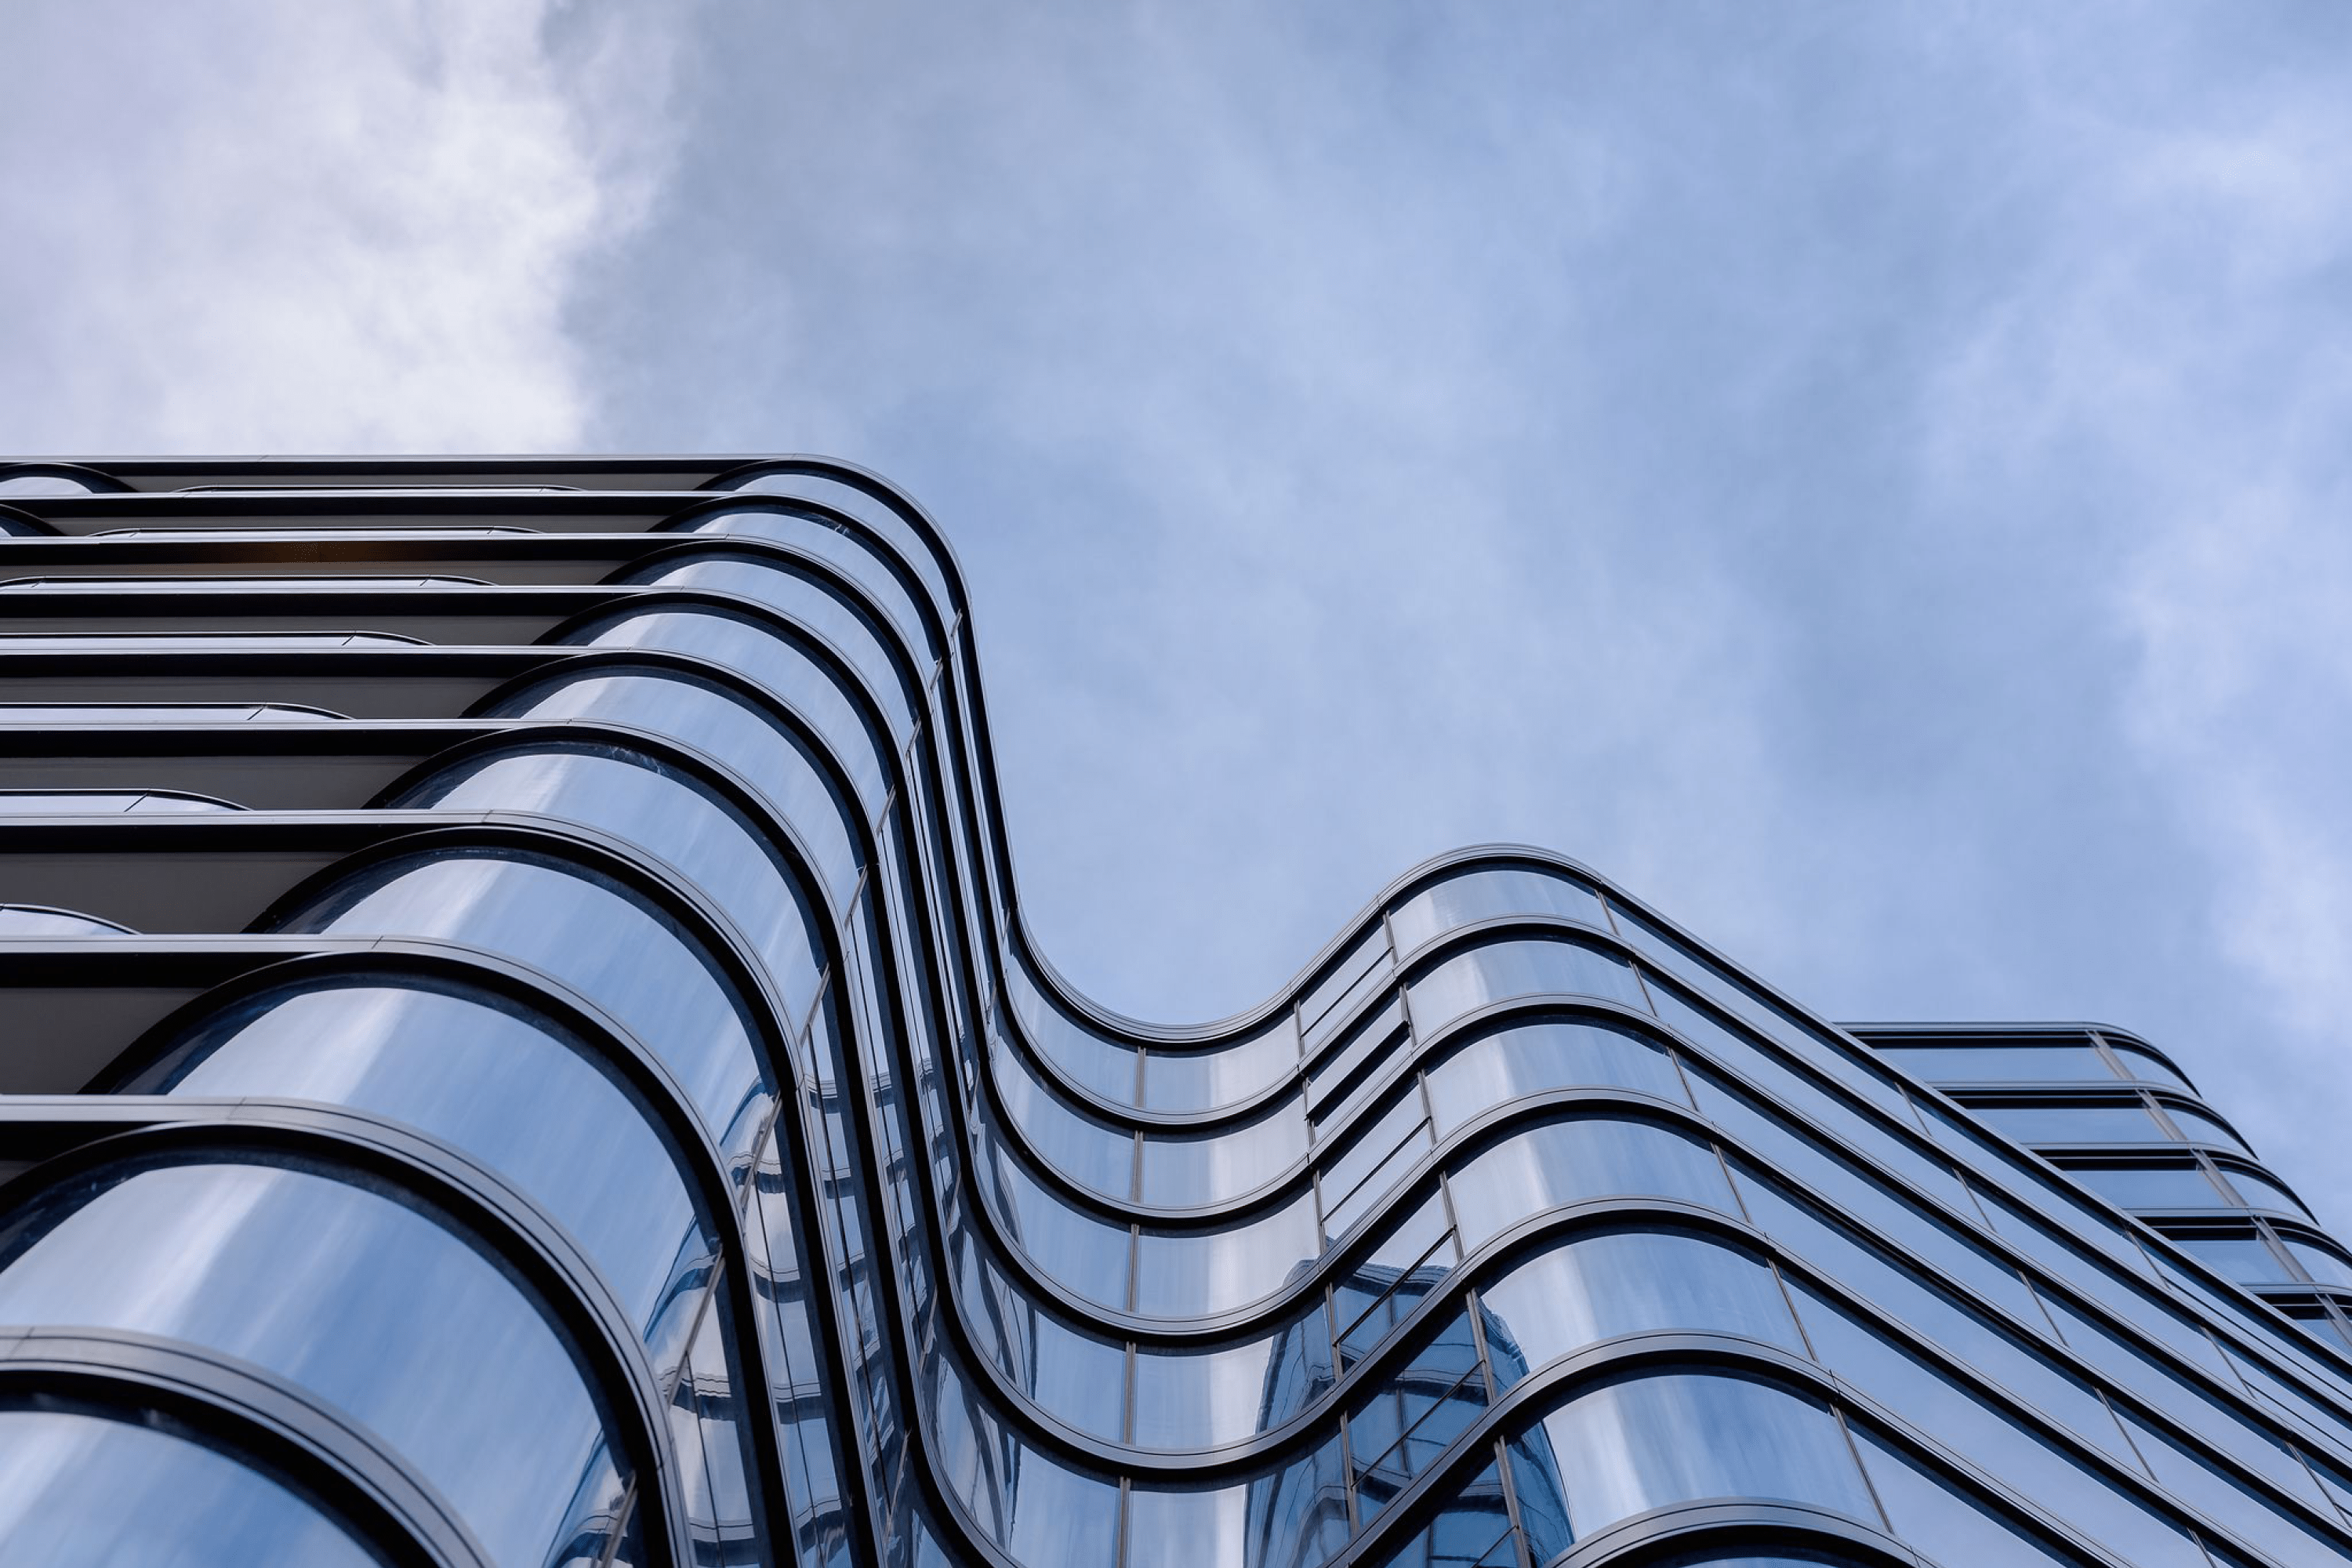 Photograph looking up the fluid façade of Opera Residence designed by Tzannes